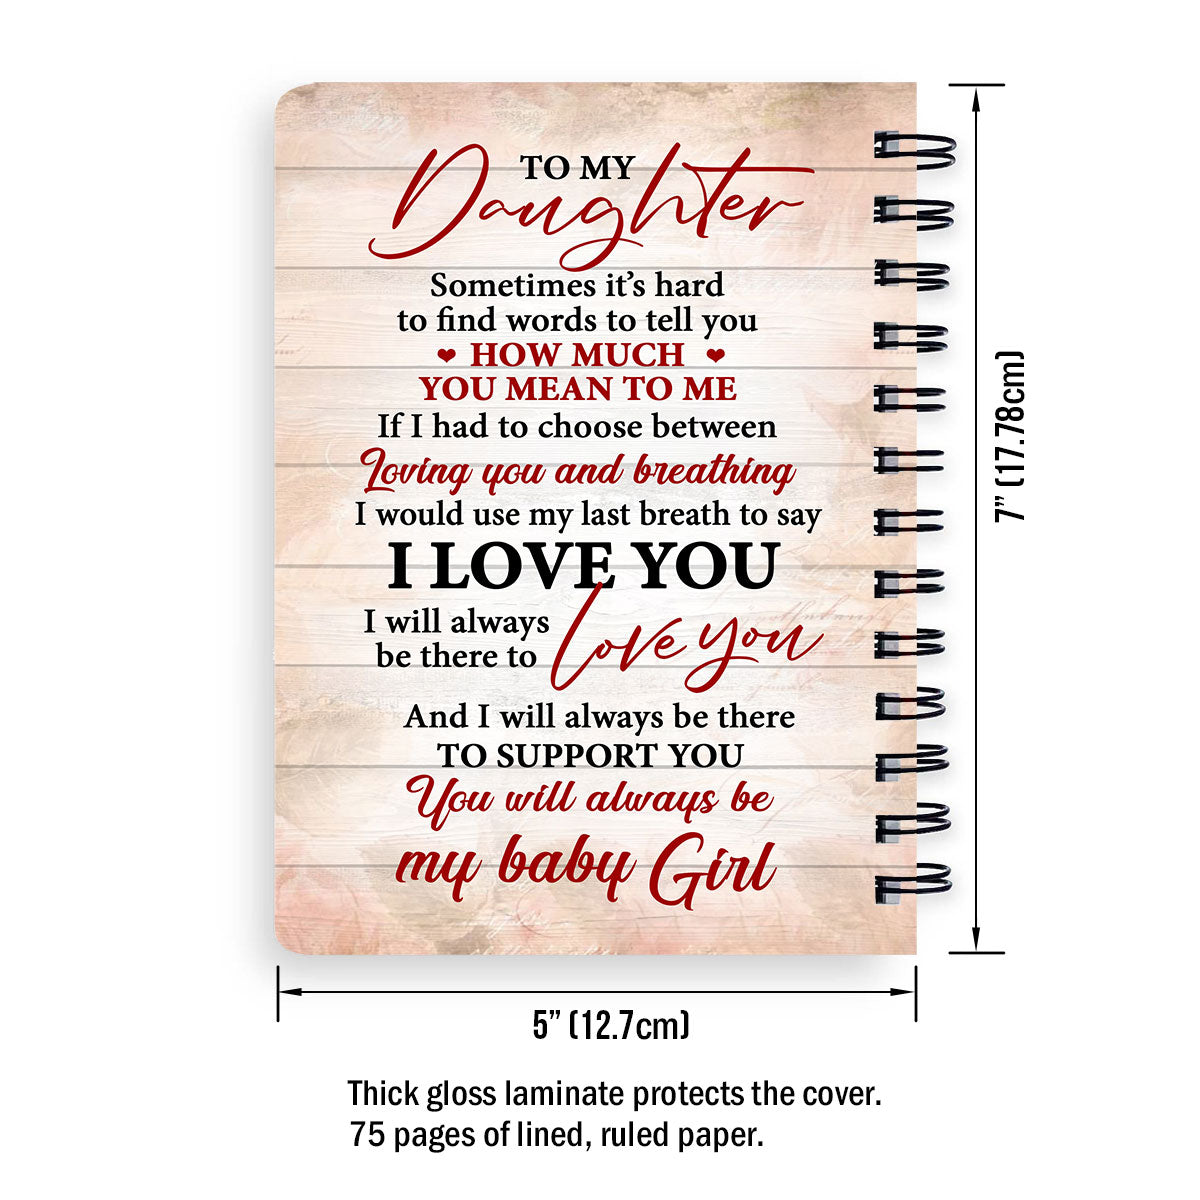 You Will Always Be My Baby Girl - Beautiful Personalized Spiral Journal For Daughter NUH215